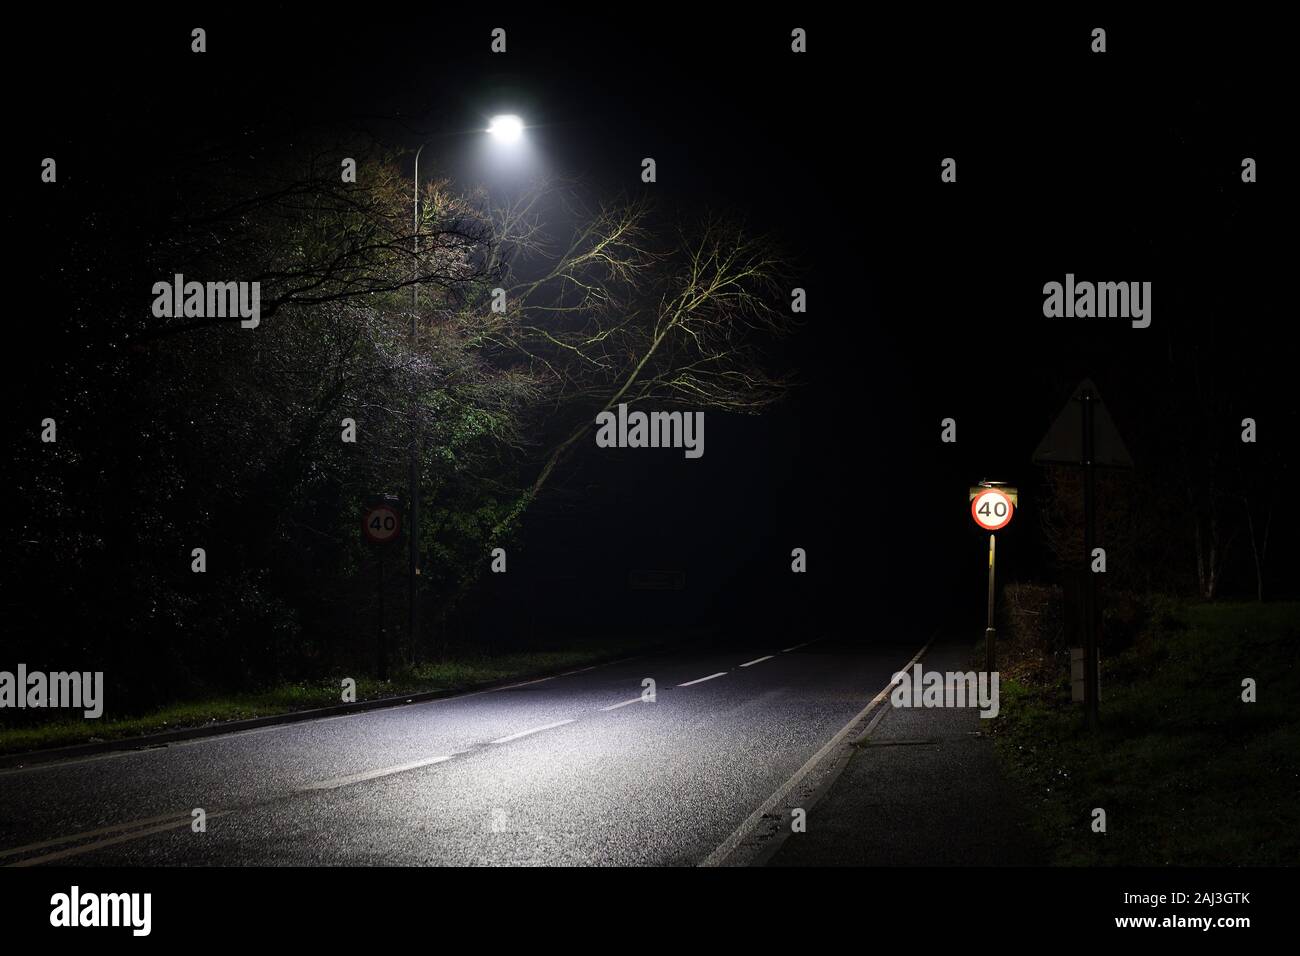 Trees and 40 mph speed limit sign under street lamp in UK at night Stock Photo